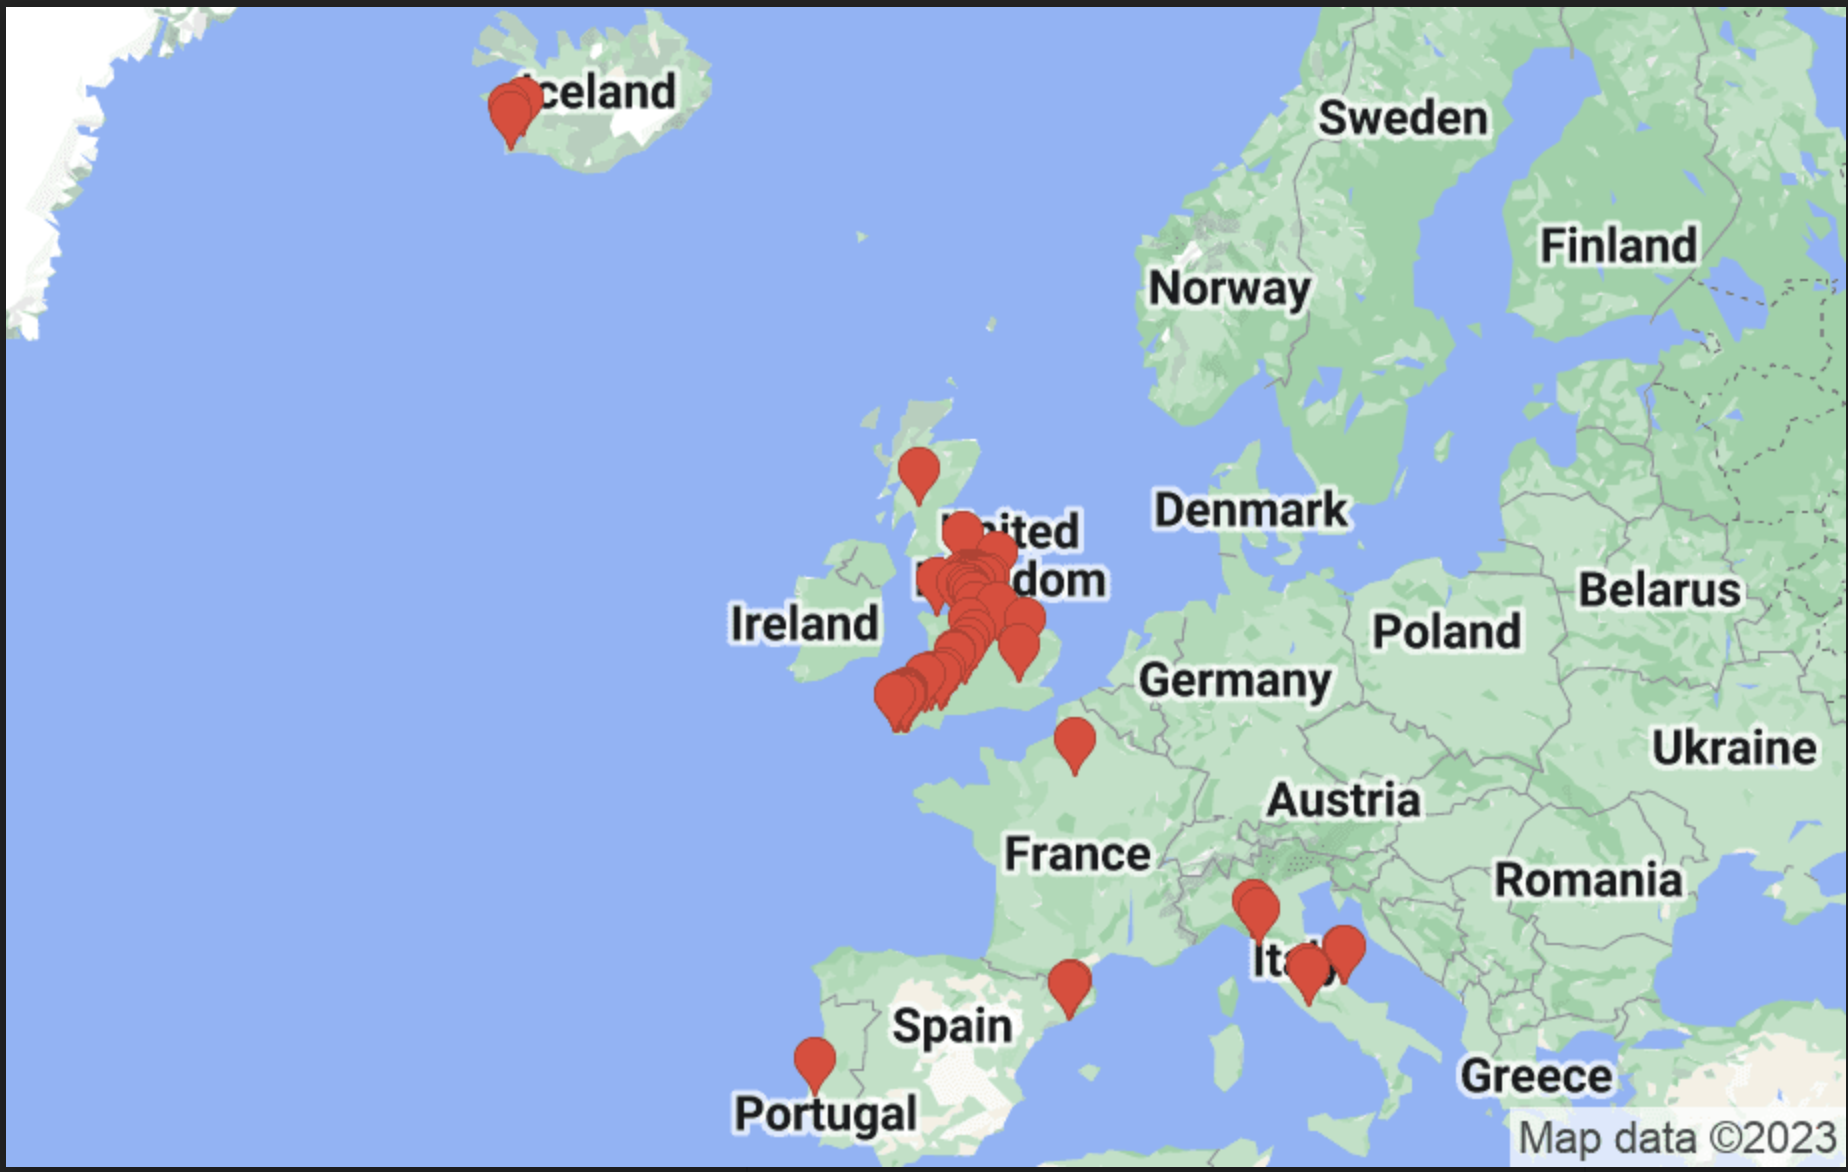 2022 travel map from Google Maps showing the countries and places I visited